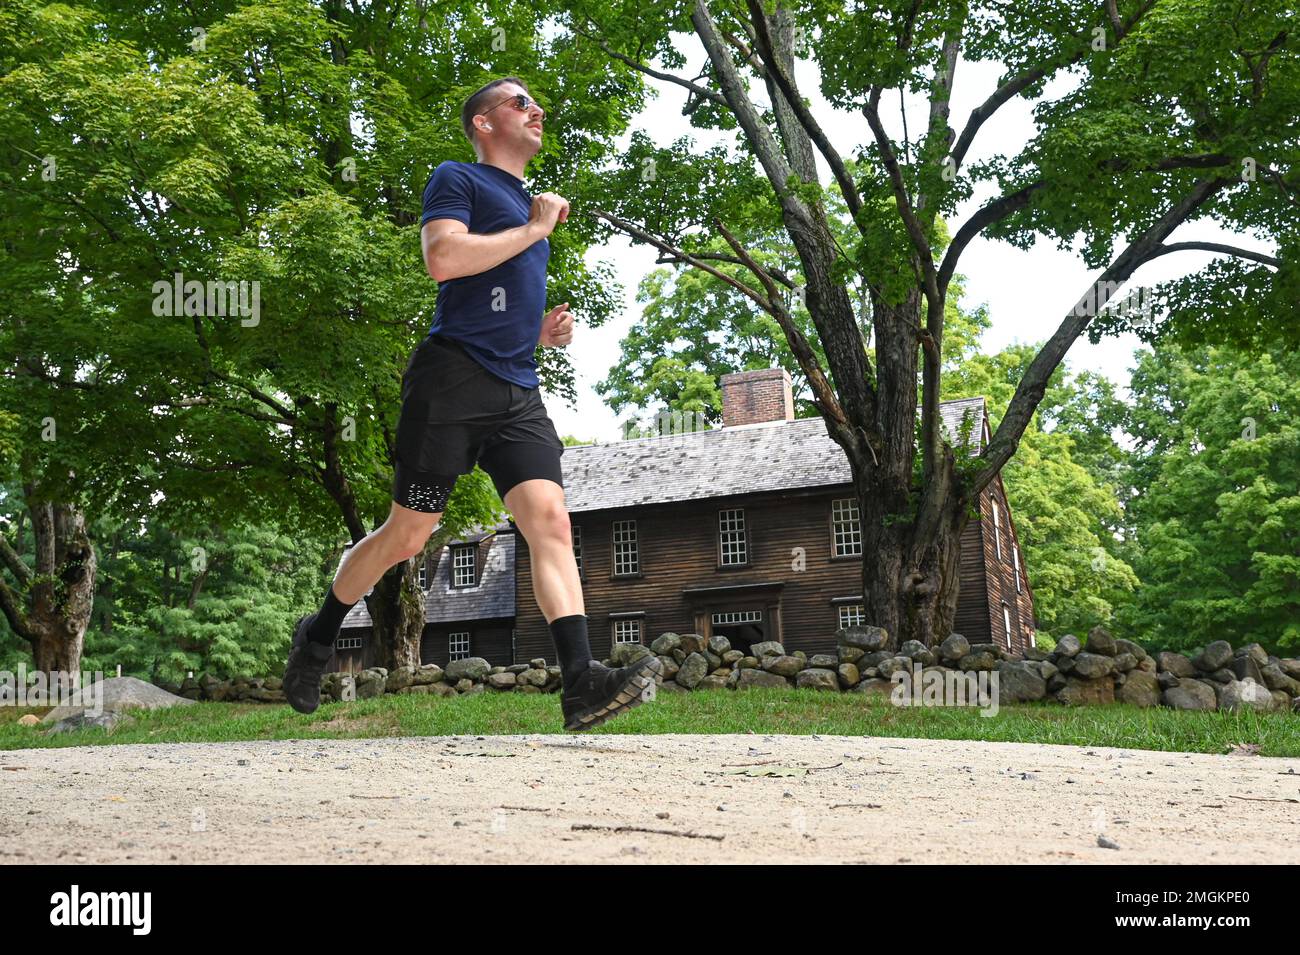 Staff Sgt. Jordan Rhea, 319th Recruiting Squadron NCO in charge of personnel section, runs past the Hartwell Tavern during a Battle Road 10 K race at the Minuteman State Park in Lincoln Mass., Aug. 24. Tech. Sgt. Matthew Ruscitti, 319th Recruiting Squadron NCO in charge of operations, was the overall male winner and Dannie Wu, Contracting Directorate price analyst, was the overall women’s winner. Stock Photo